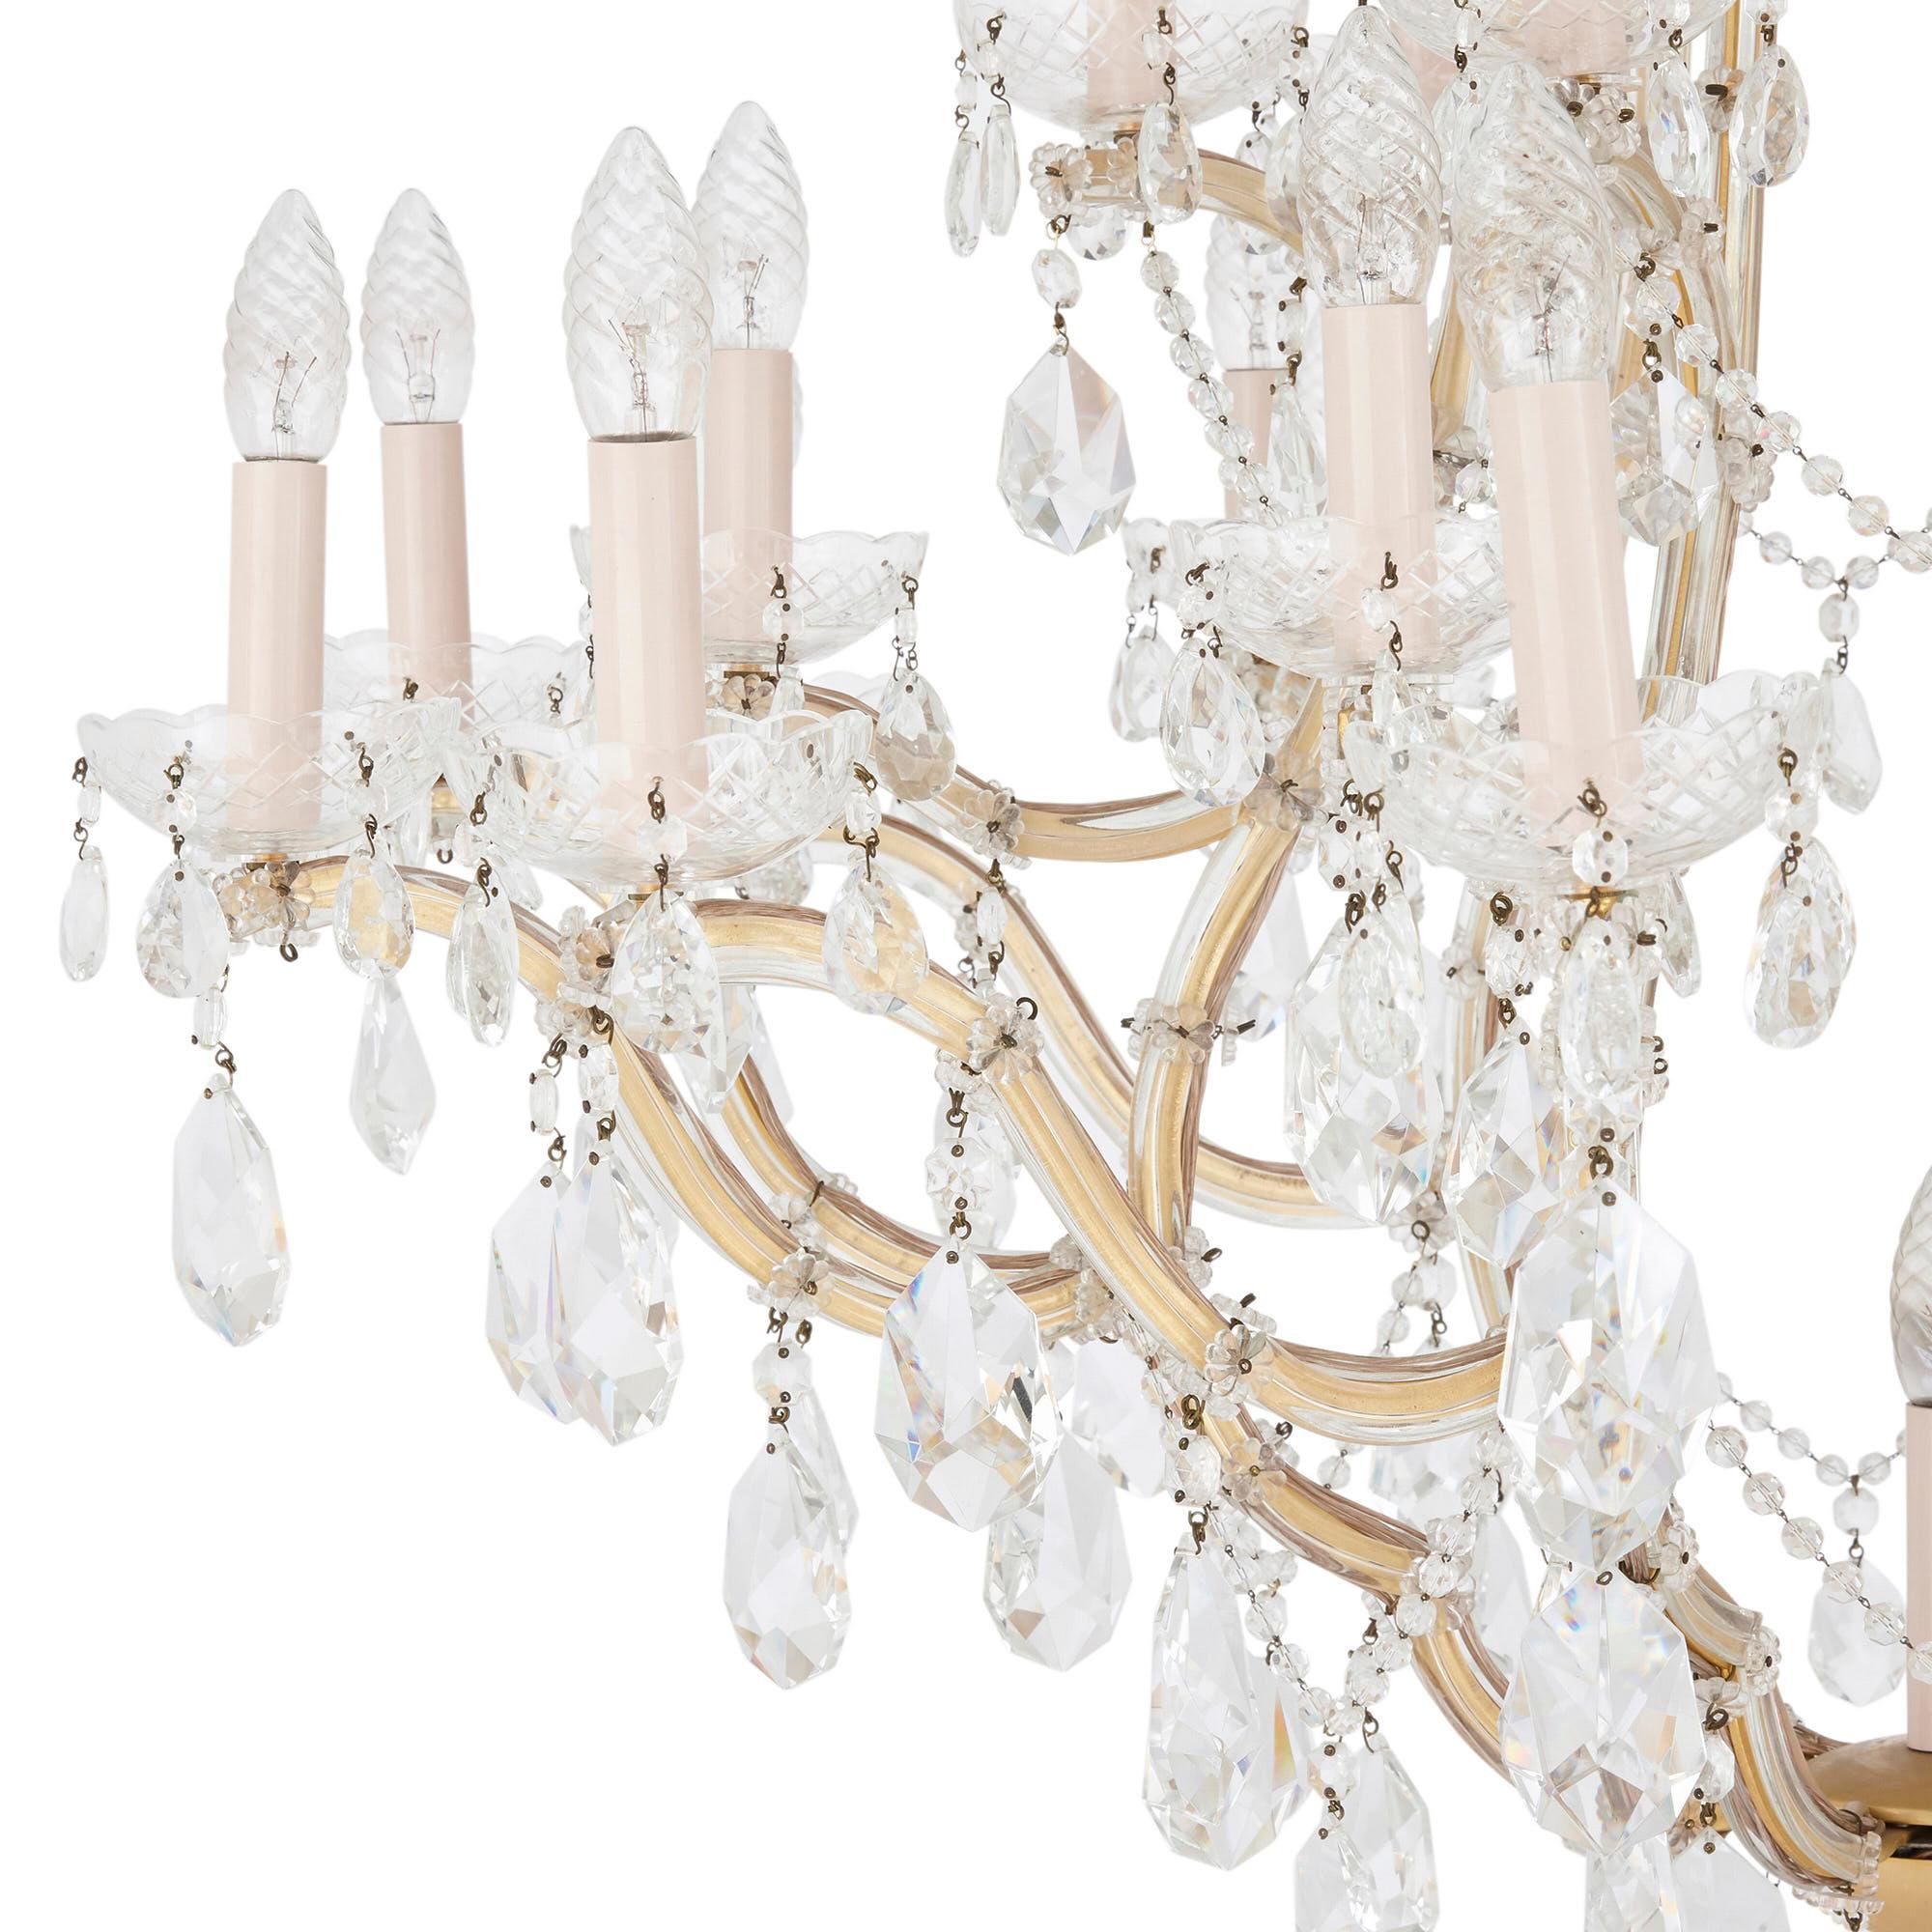 Pair of Bohemian faceted glass Rococo style chandeliers
Bohemian, 20th century
Measures: Height 130cm, diameter 105cm

This pair of luxurious chandeliers is crafted in the Bohemian manner from wonderfully faceted cut glass. Each chandelier